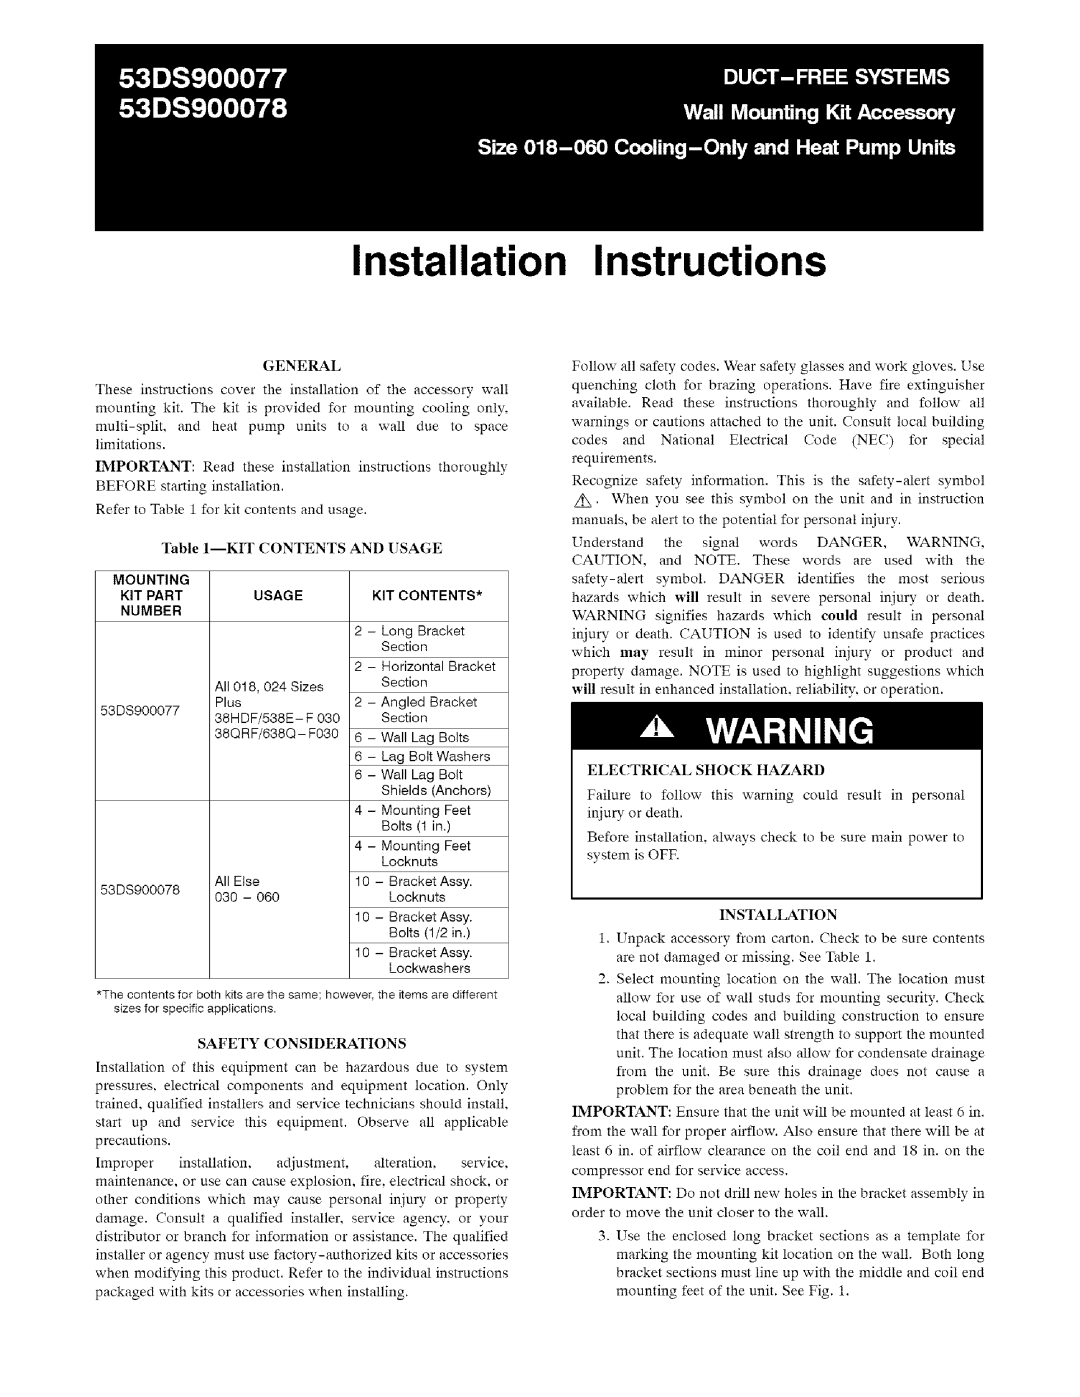 Sears 53DS900078 installation instructions Installation Instructions, Mounting, Kit Part, Usage, Kit Contents, Number 